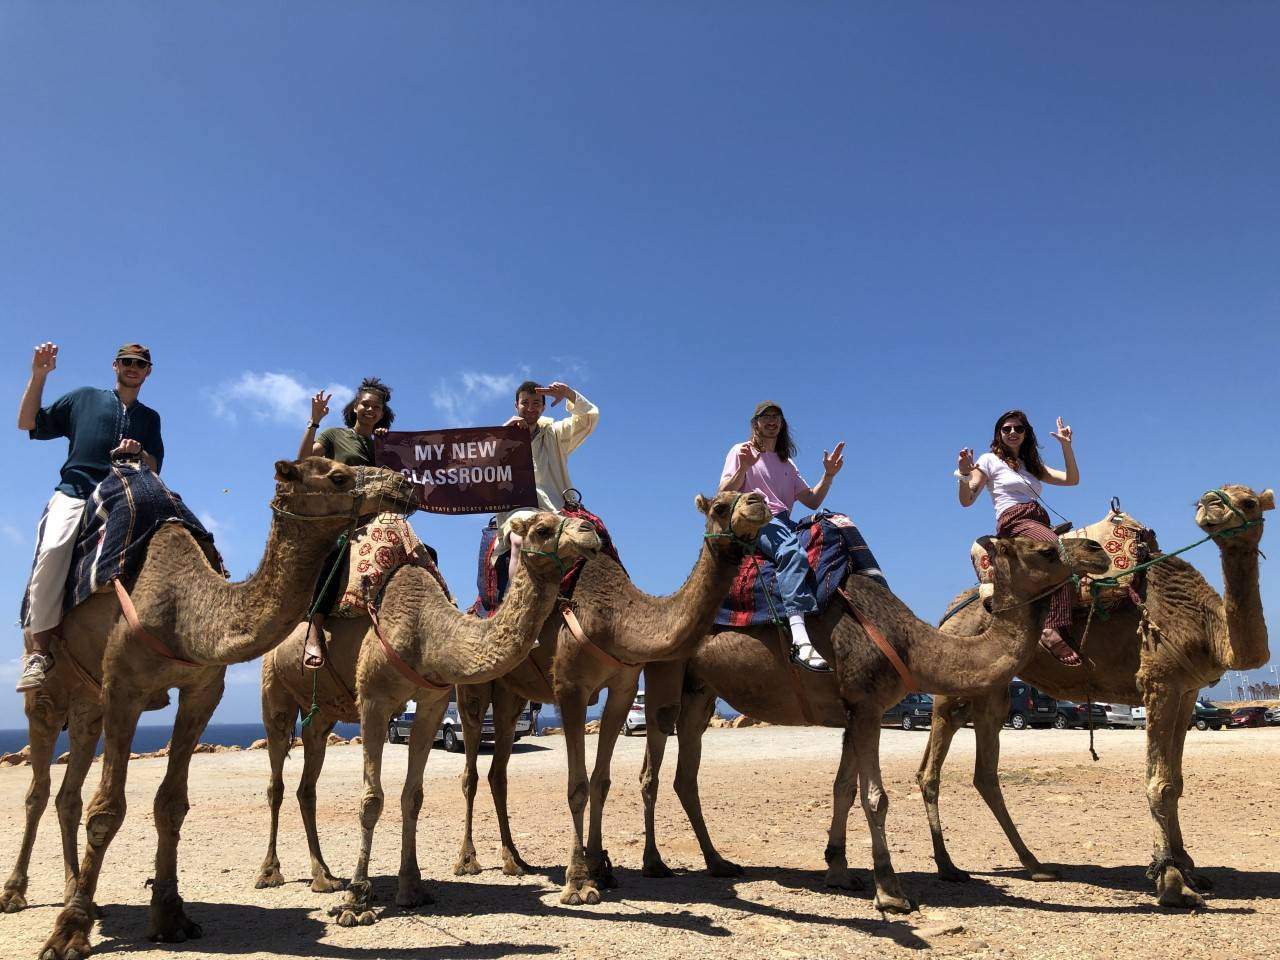 Photo of students riding camels and holding a banner reading "My new classroom"